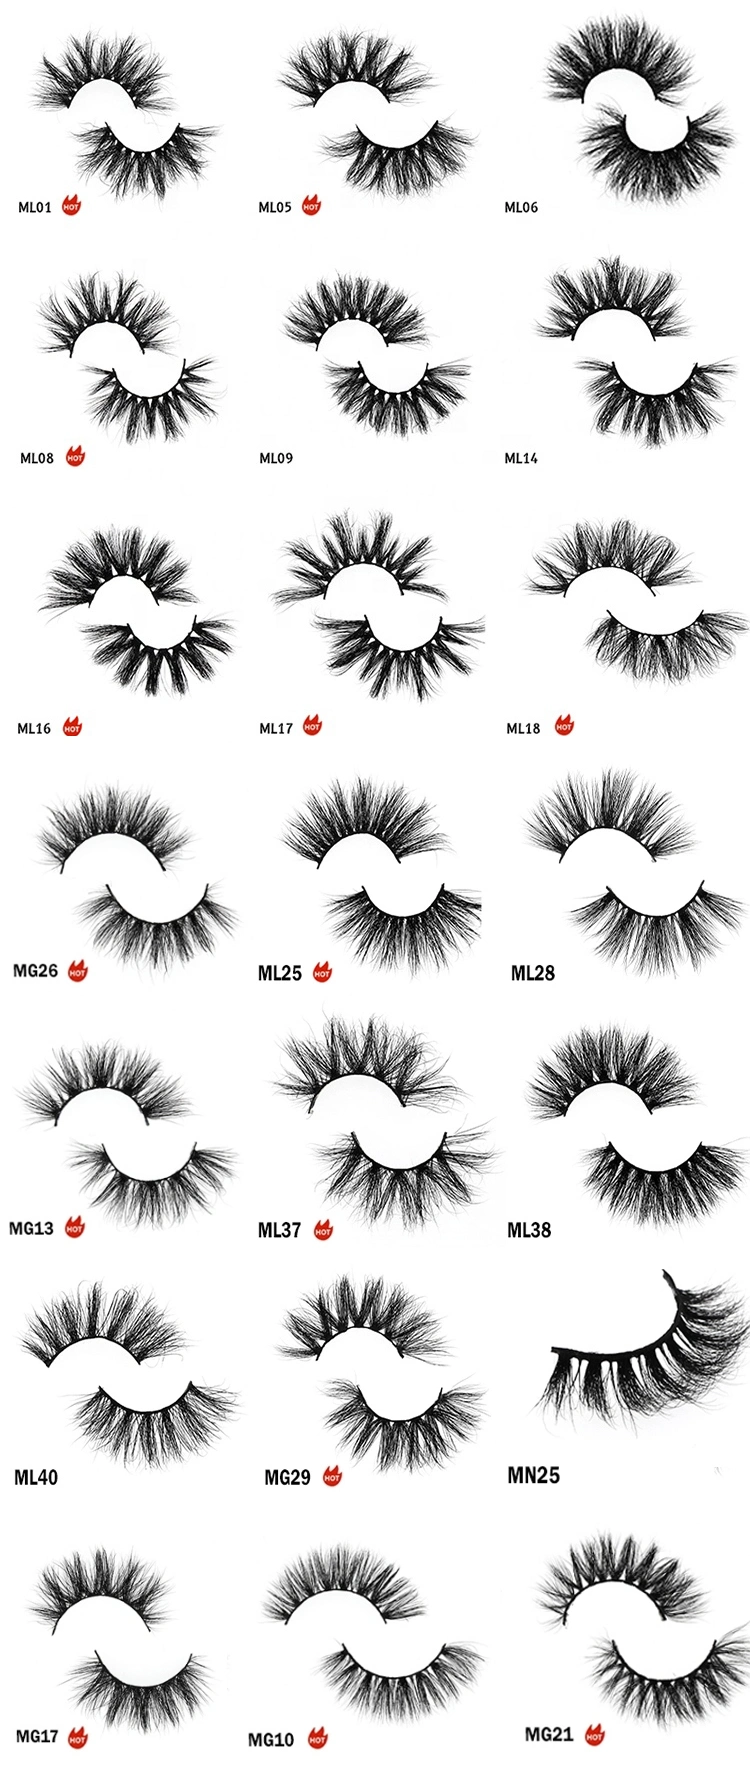 Cruelty Free Luxury Fluffy Cheap Lashes Faux Mink Eyelashes Mink Eyelashes Private Label 3D Mink Lashes